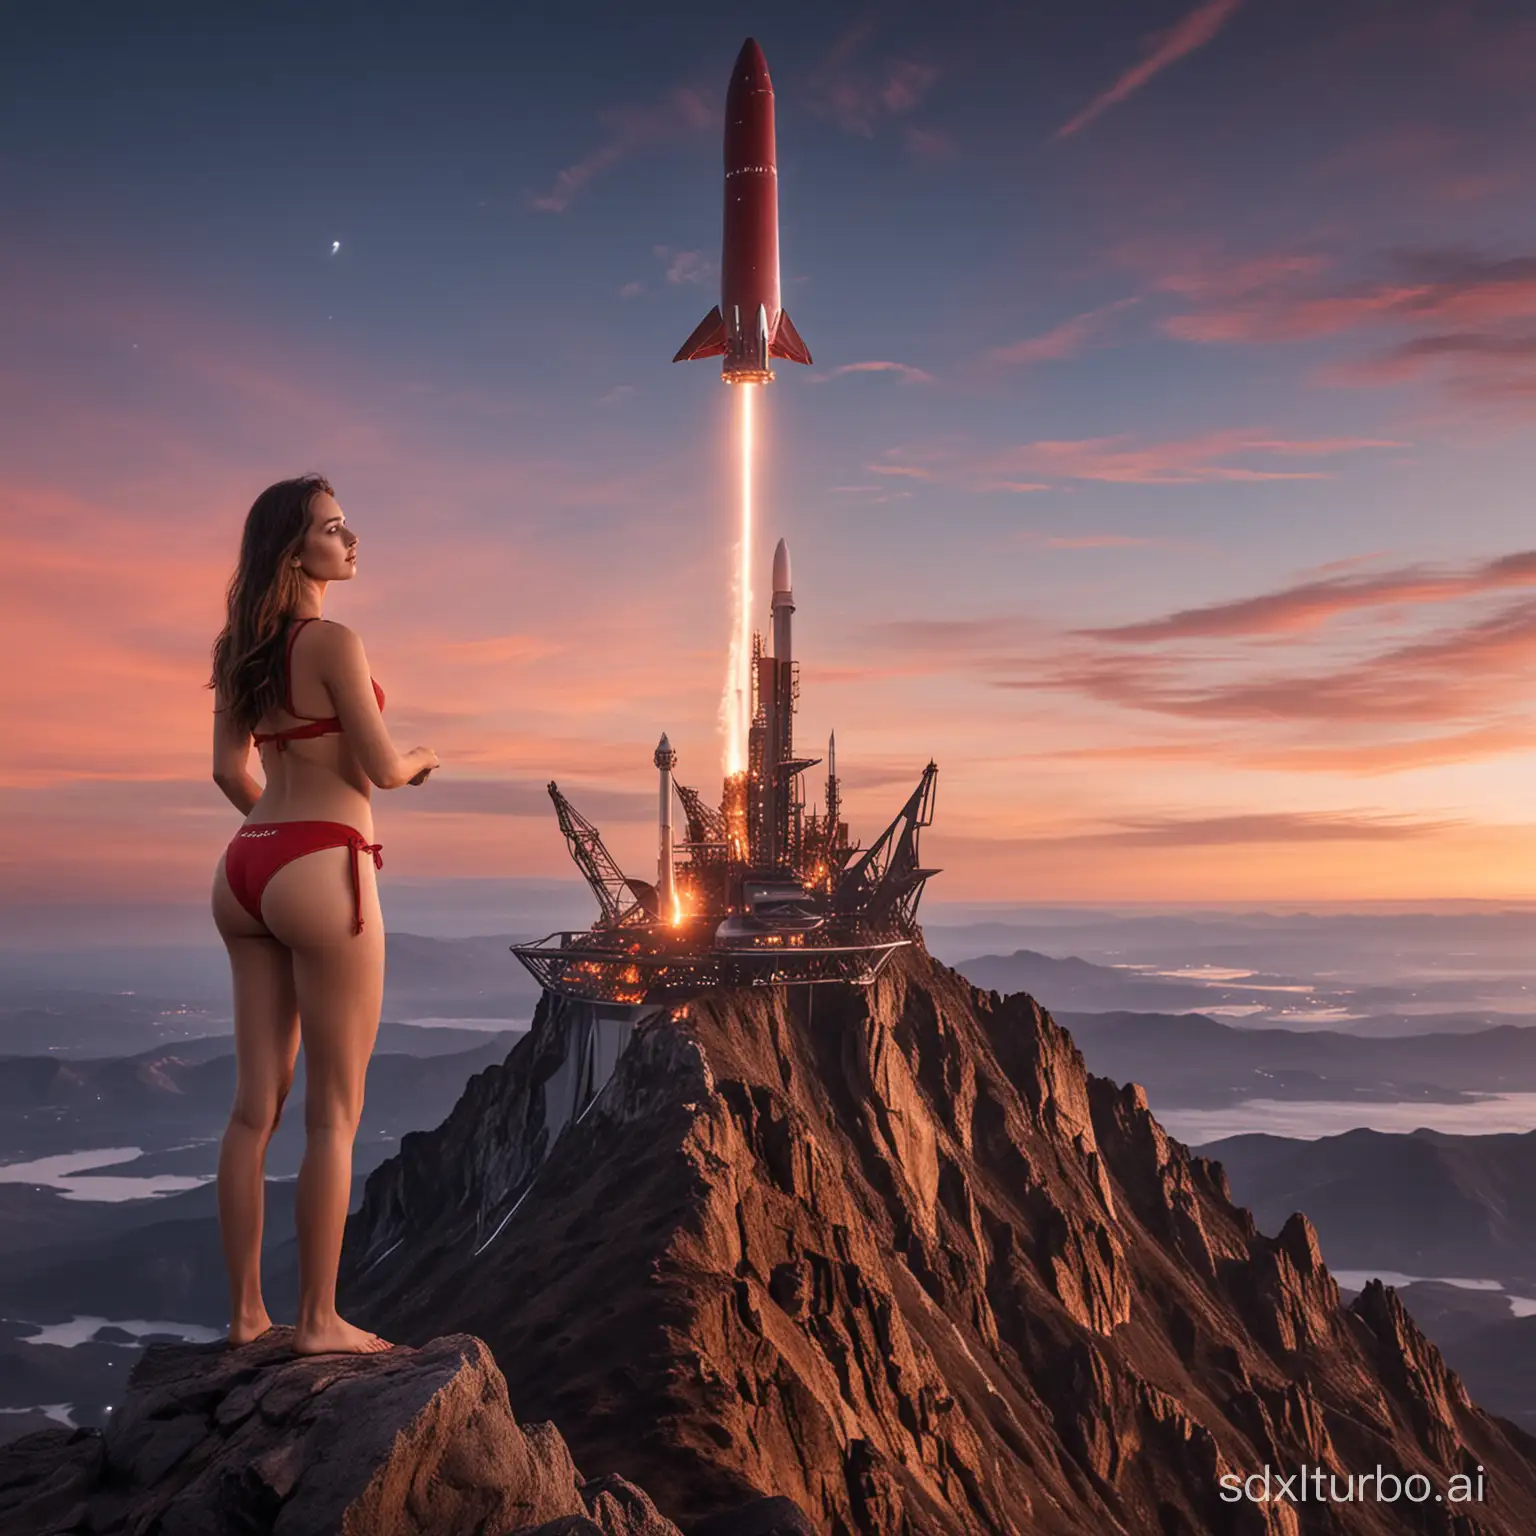 Awesome photo of a wizard on the top of a mountain, she's creating SpaceX spaceship with magic, at dawn, sunrise, 18 years old lady standing middle, clearly see 36F bra size, red bikini.